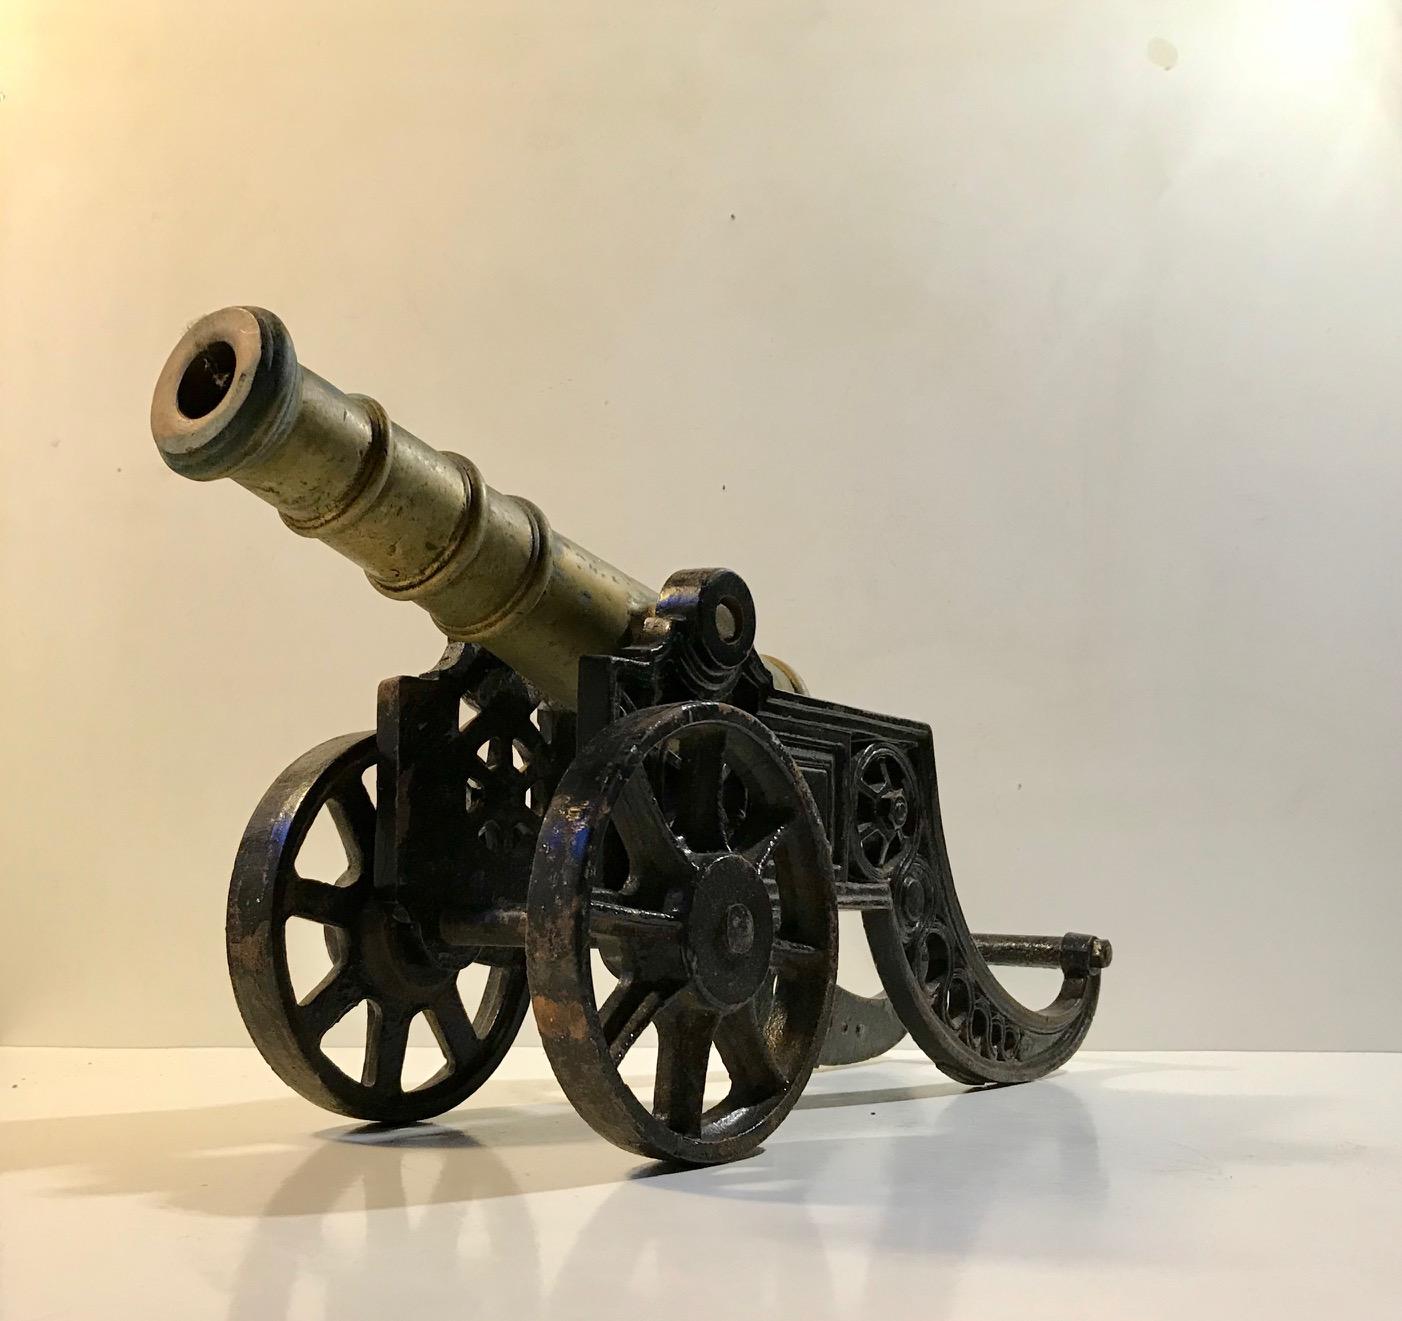 Talking about masculinity in your office setting. This well-proportioned and detailed cast of an English Signaling cannon features movable parts and wheels in iron and cannon barrel in solid bronze. It shows ornate detailing and has a worn